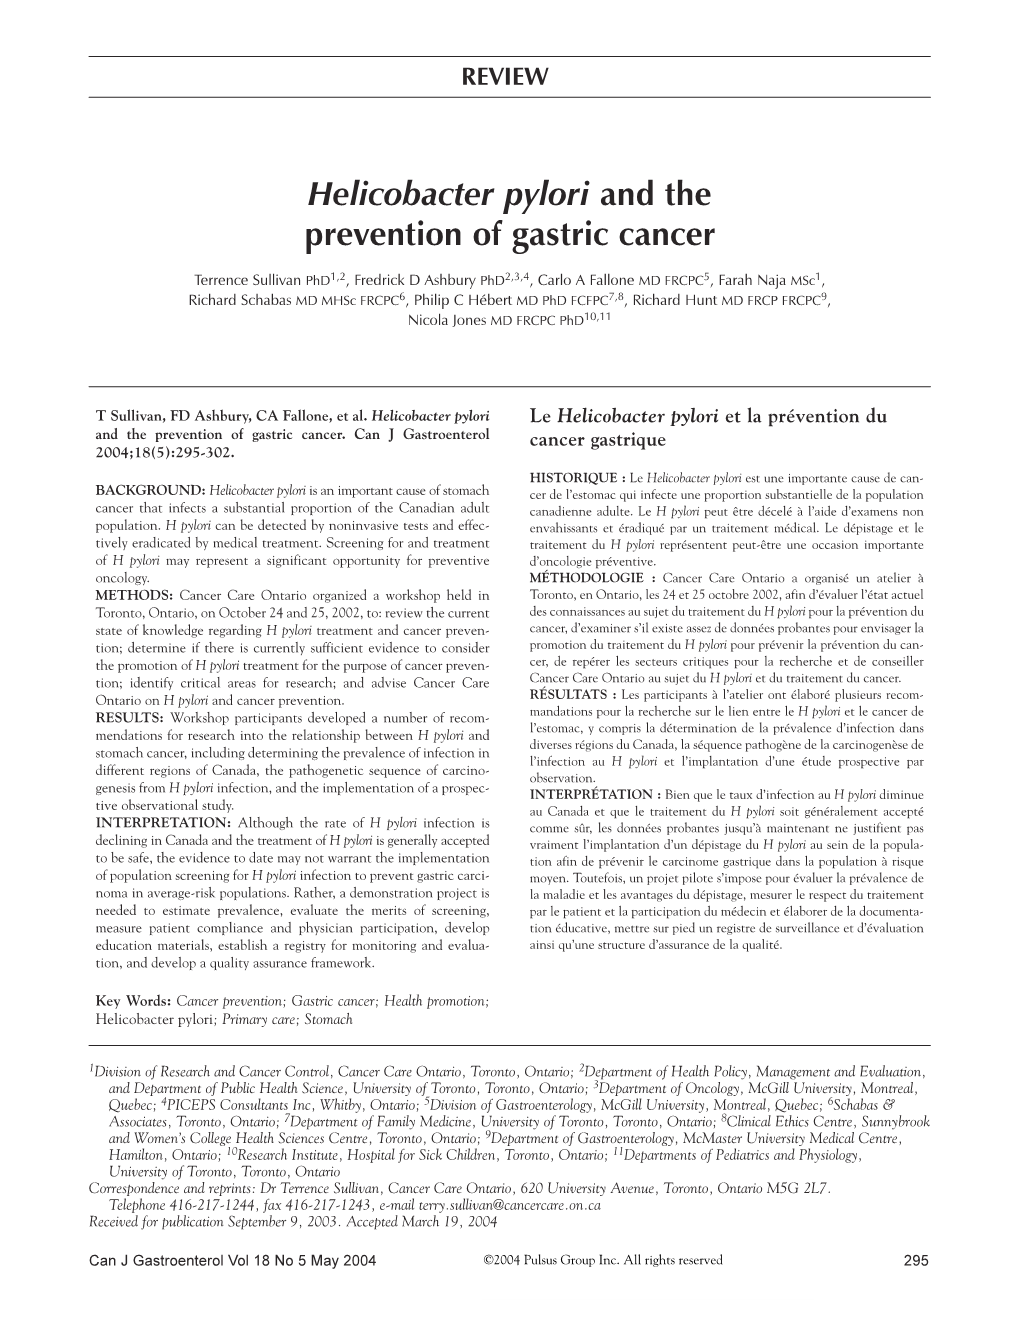 Helicobacter Pylori and the Prevention of Gastric Cancer